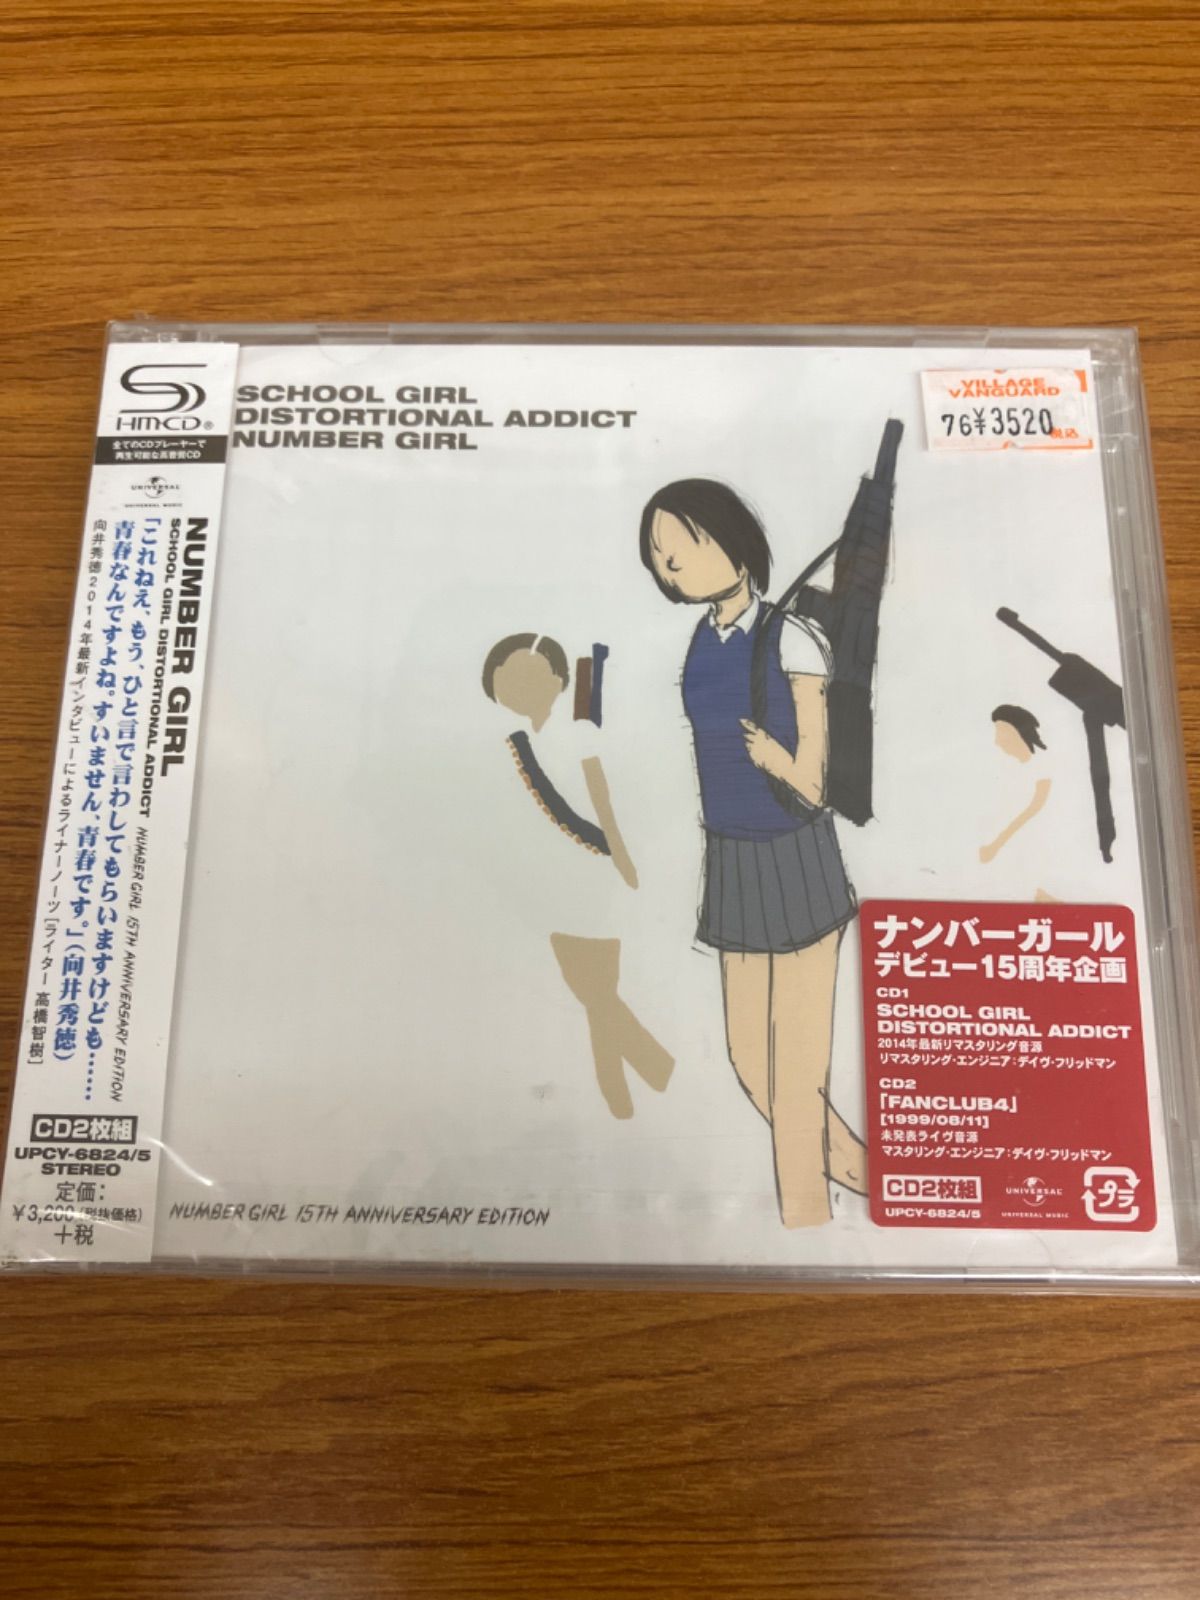 School Girl Distortional Addict 15th Anniversary Edition NUMBER GIRL